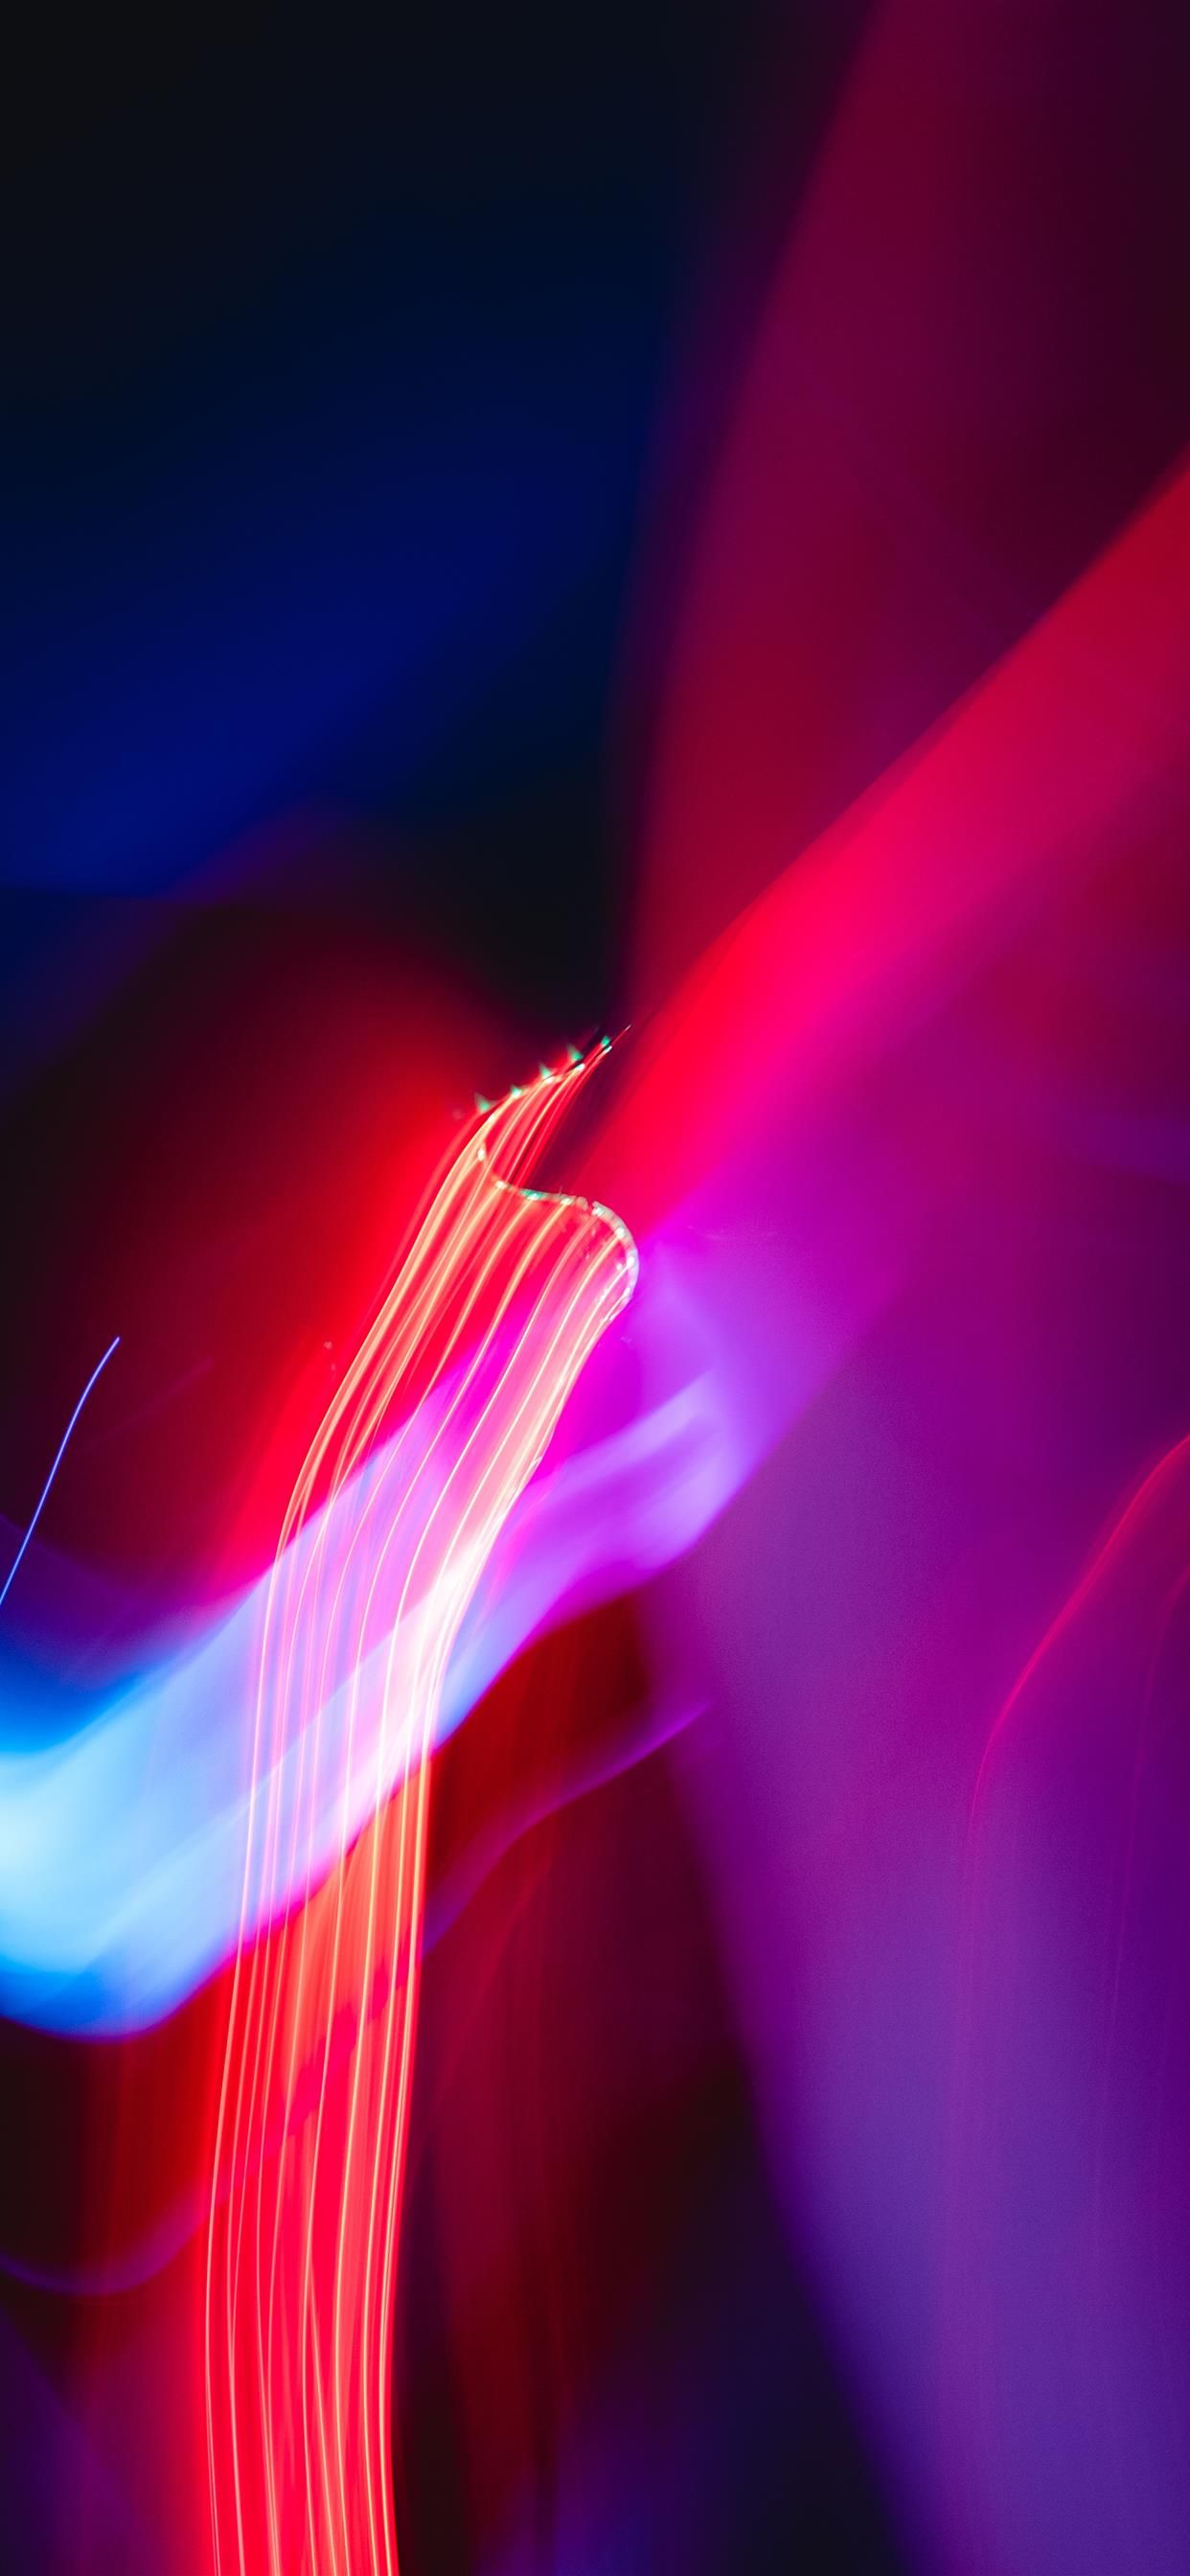 turned on red and blue lights iPhone 11 Wallpaper Free Download